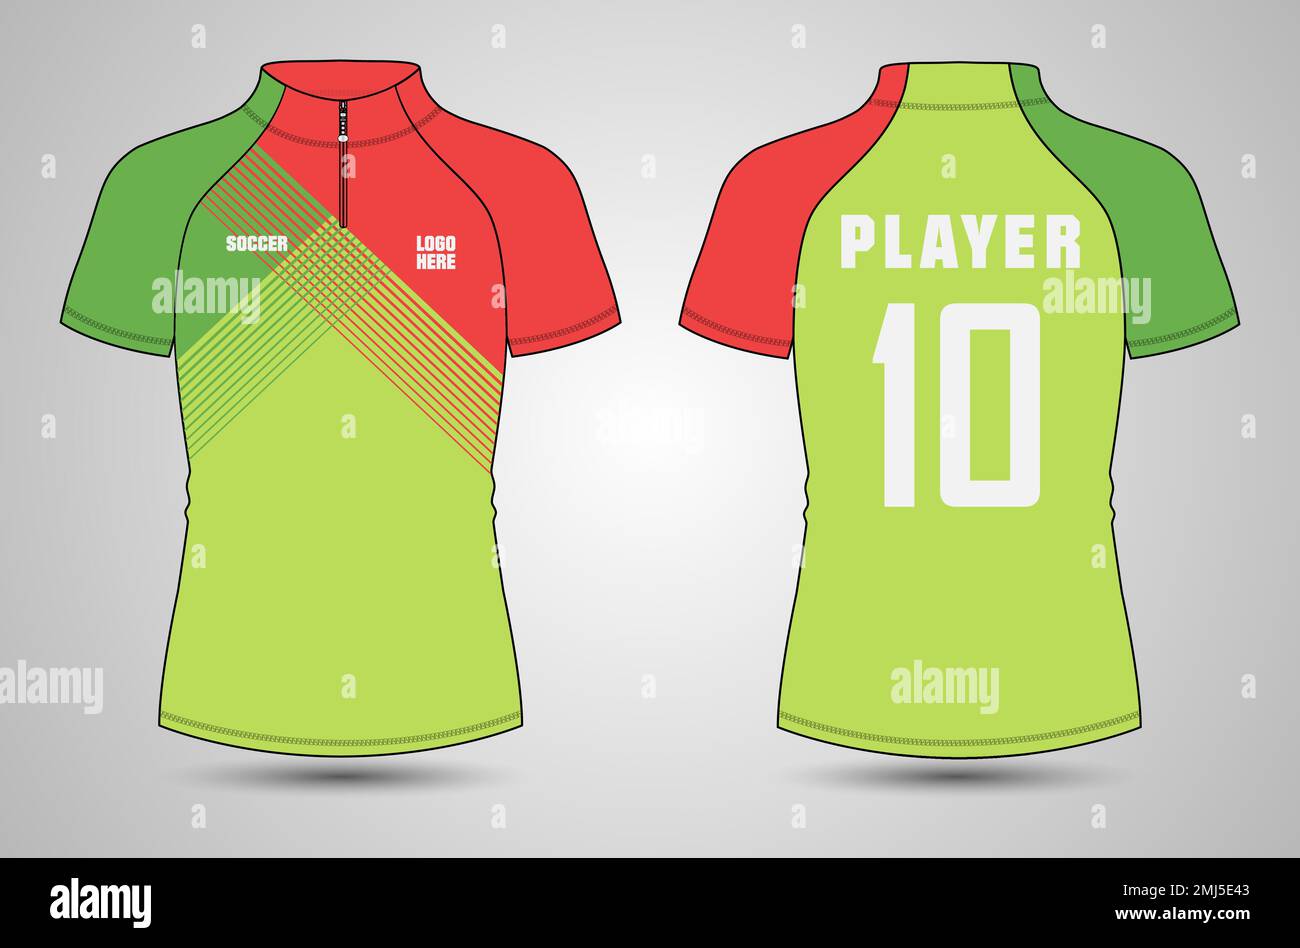 All Star Basketball uniform or jersey, shorts, socks template for  basketball club. Front and back view